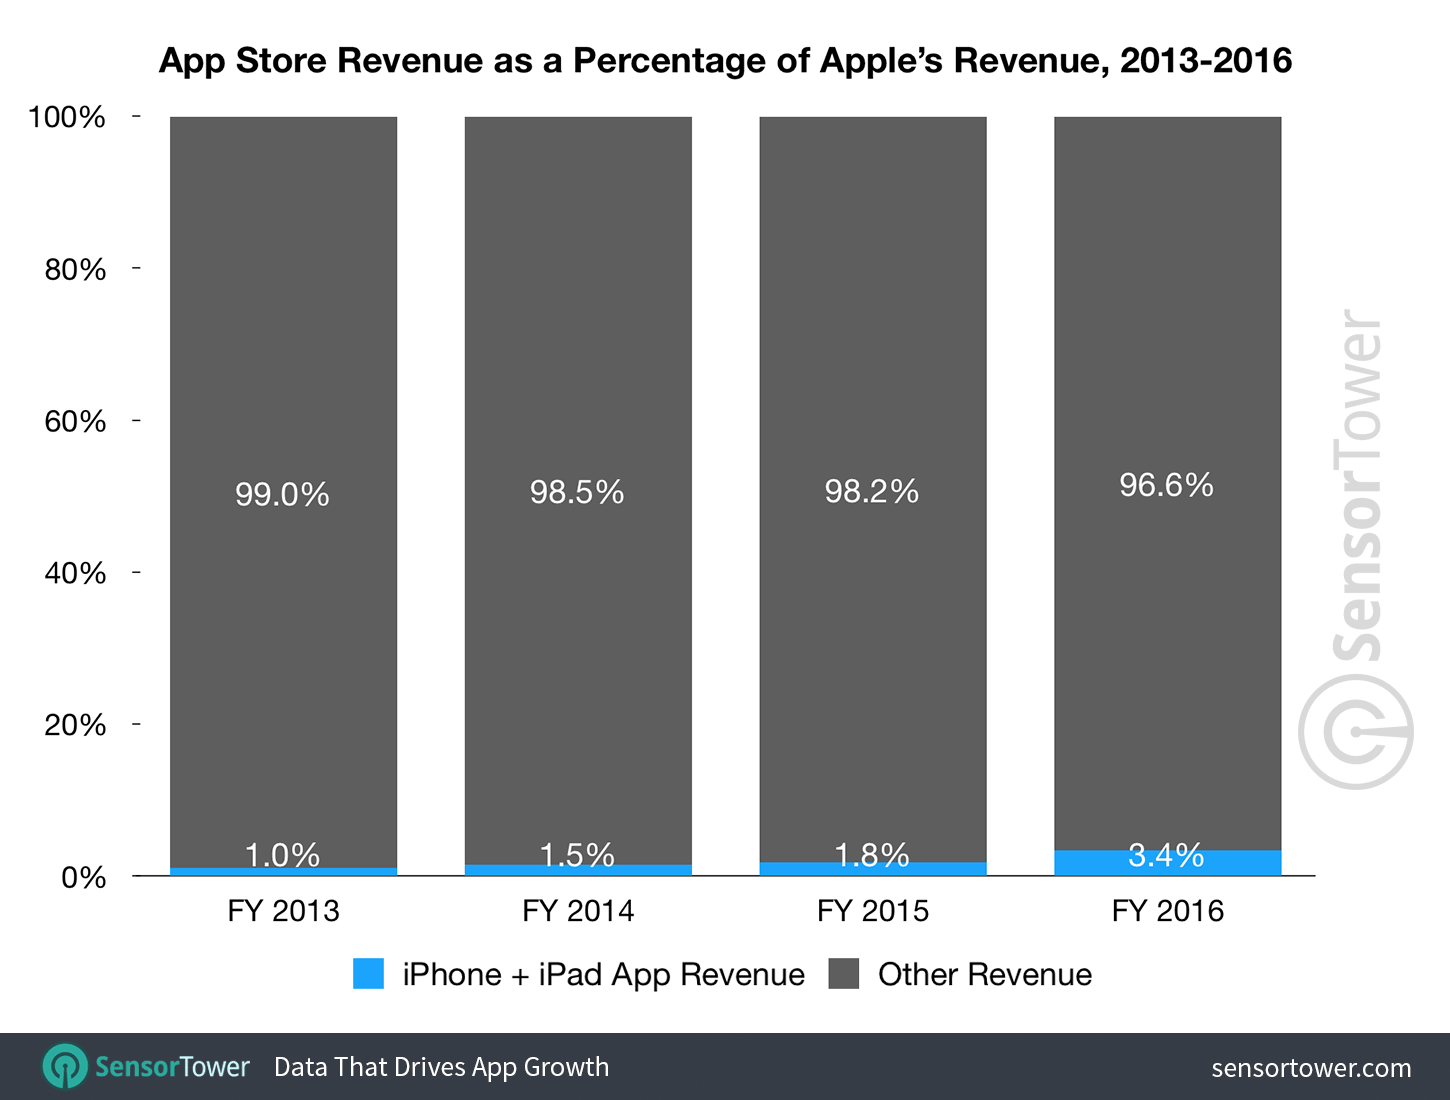 Apple's share of App Store revenue as a percentage of its net profits for fiscal years 2012 through 2016